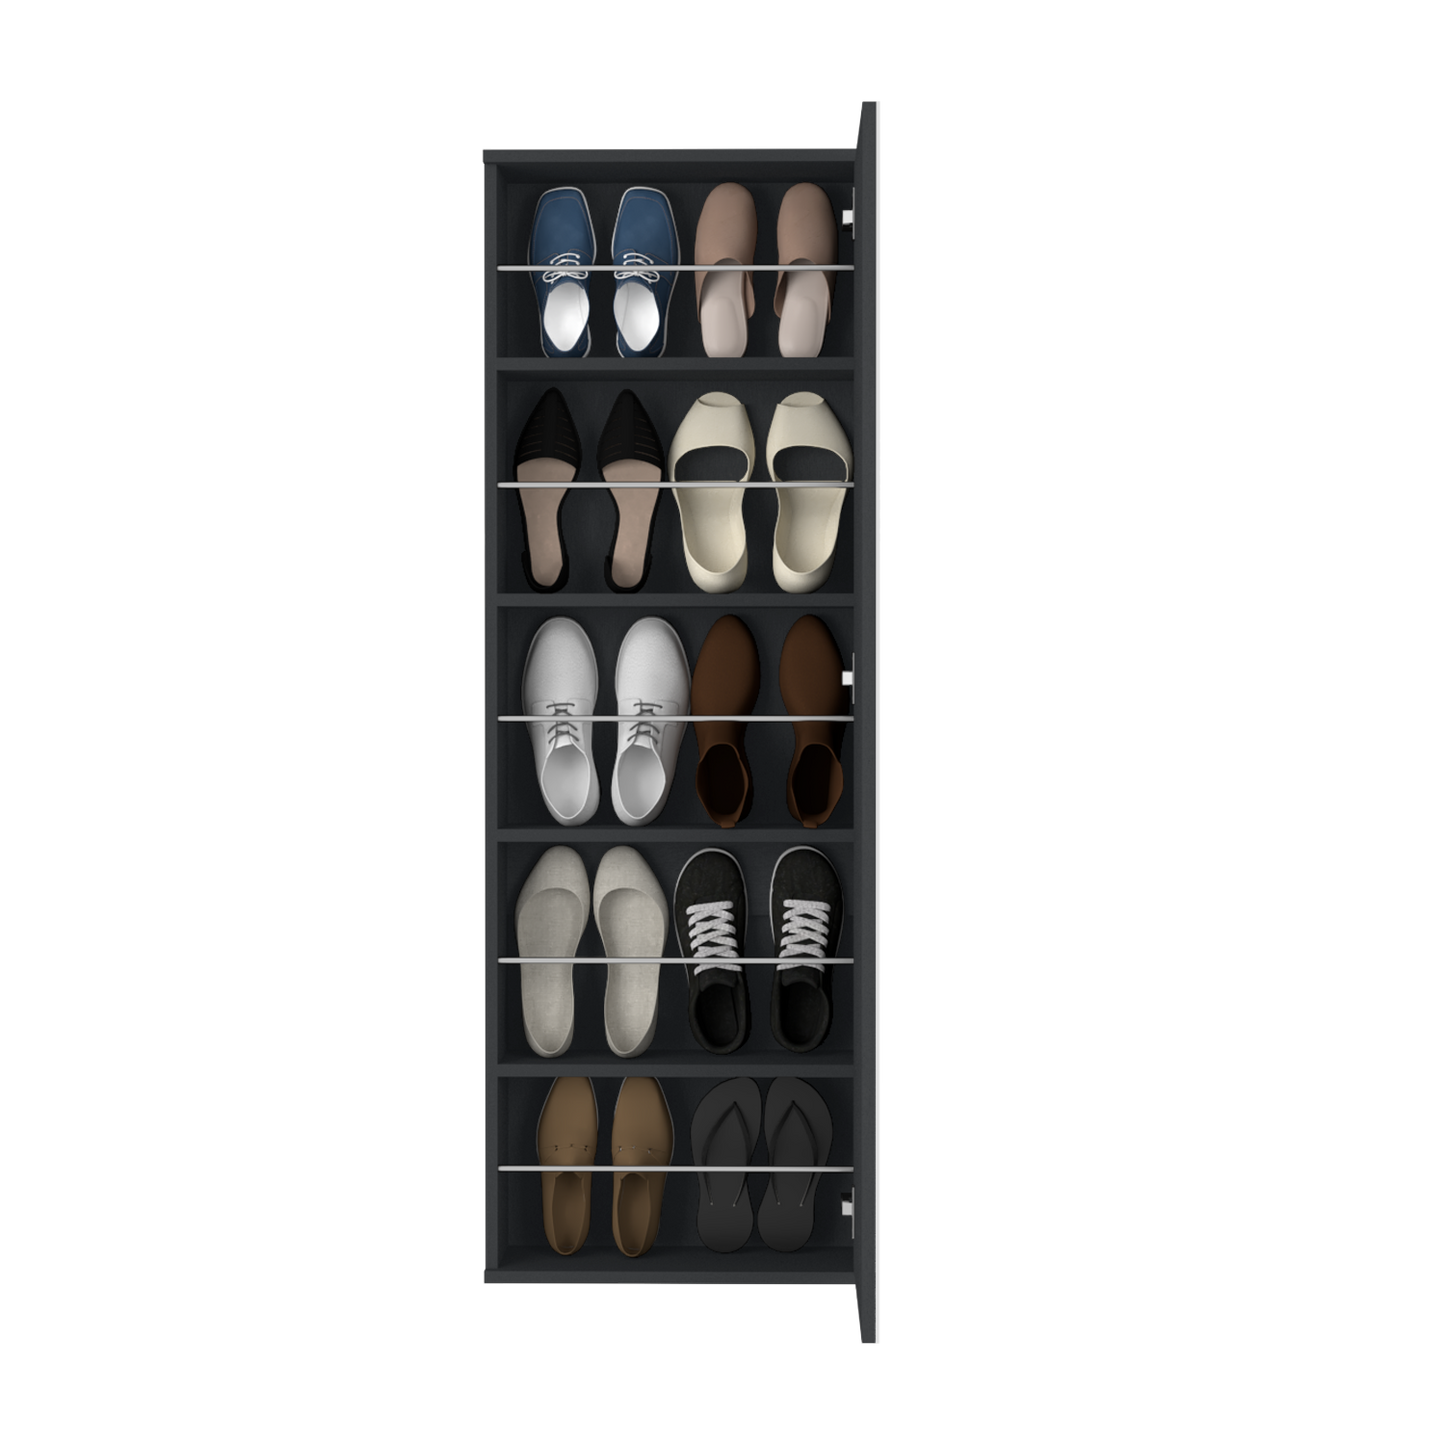 Wall Mounted Shoe Rack With Mirror Chimg, Single Door, Black Wengue Finish-4